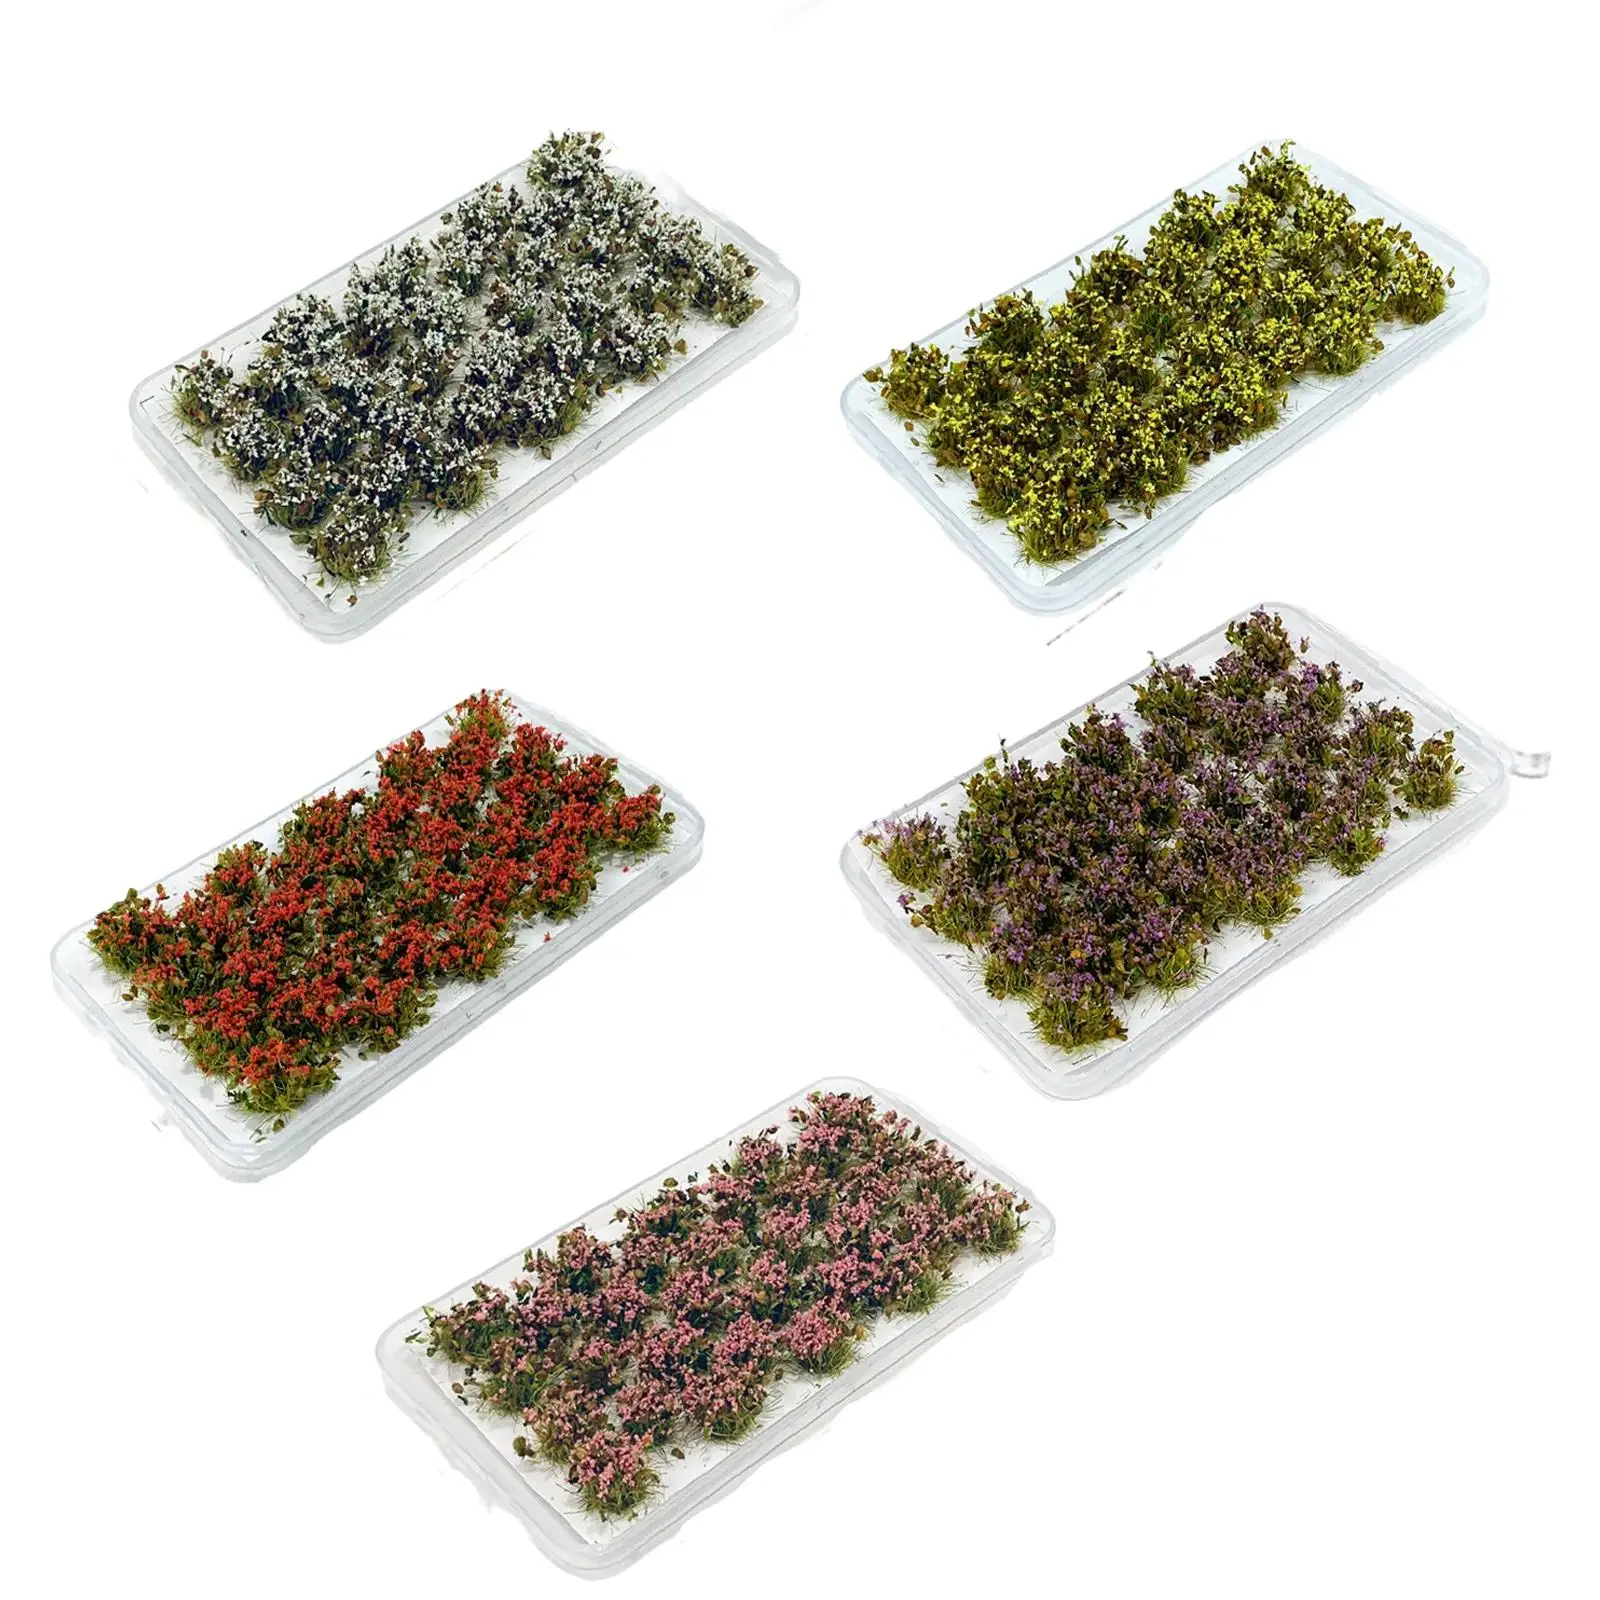 32x Miniature Flower Bushes Static Grass Model for Sand Layout Model Railway Scenery Dioramas Layout Sand Table Doll House